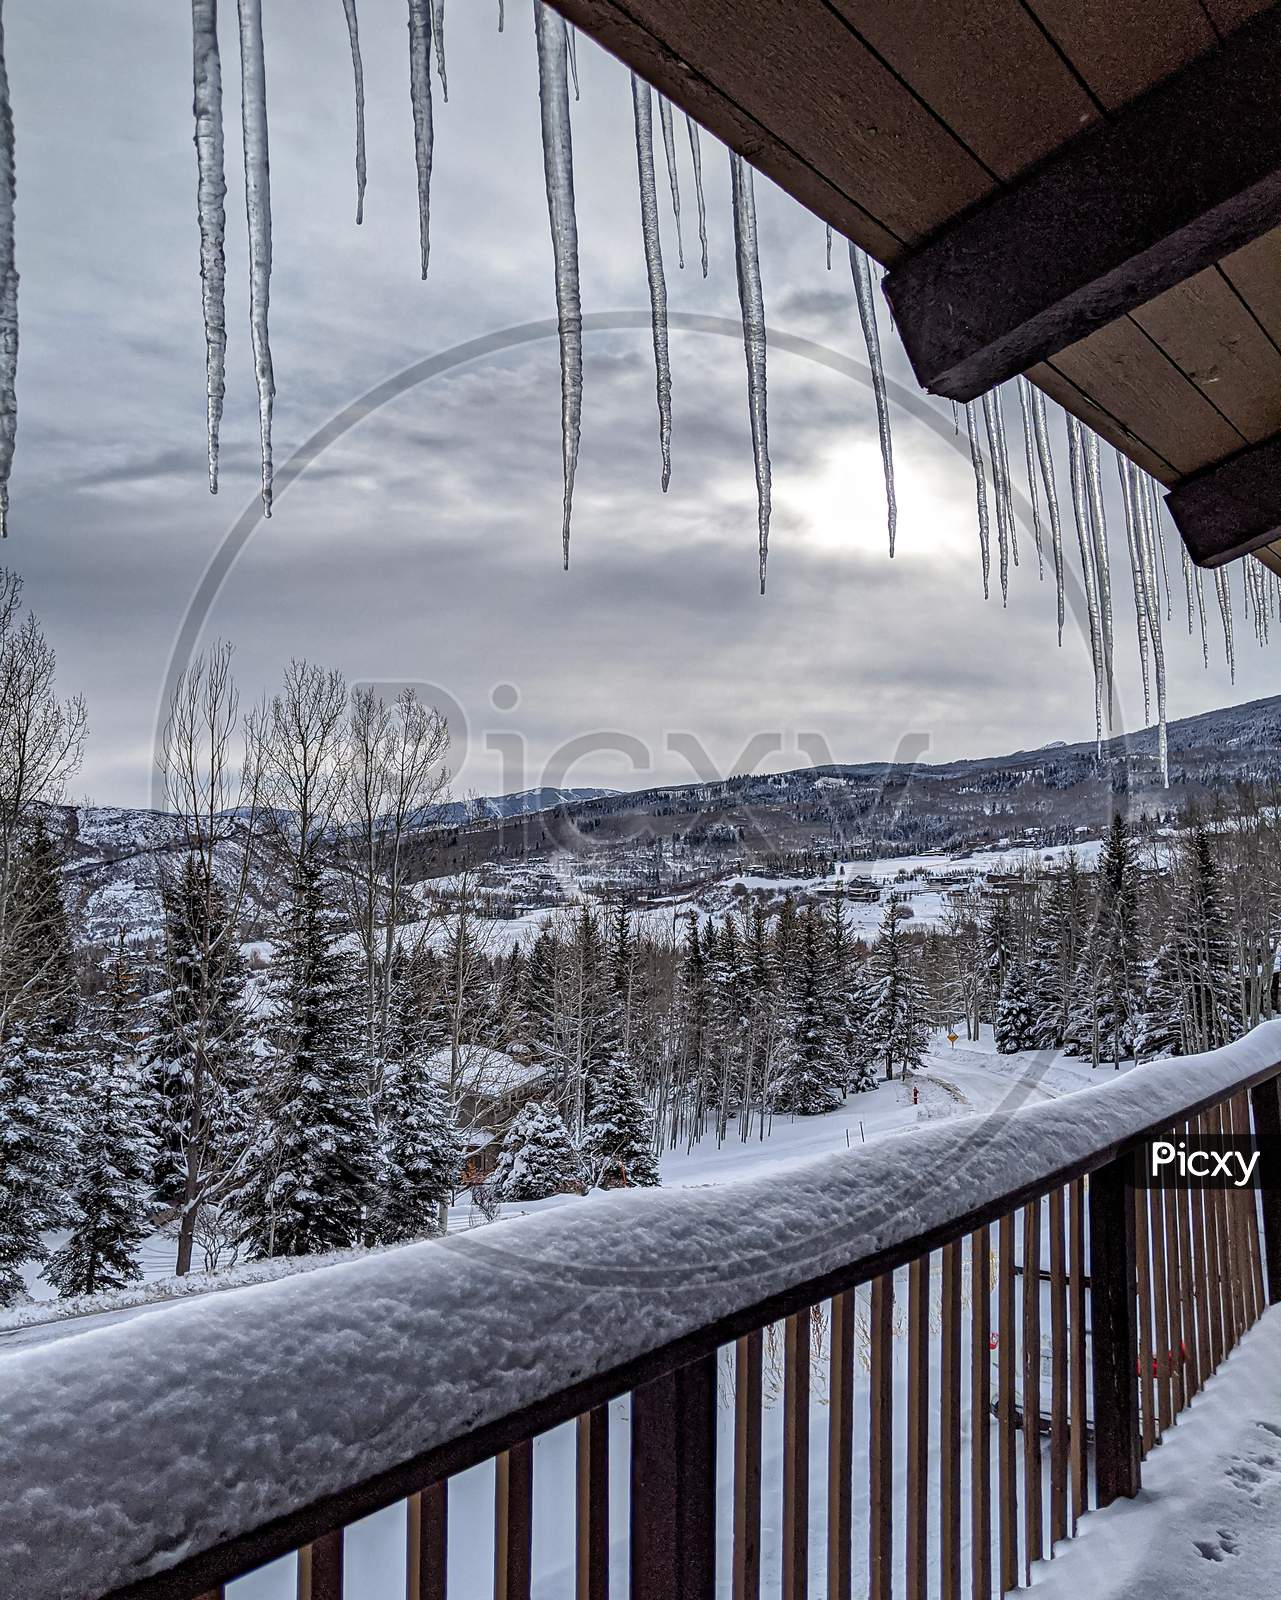 Icicles in a airbnb in Apen Colorado 